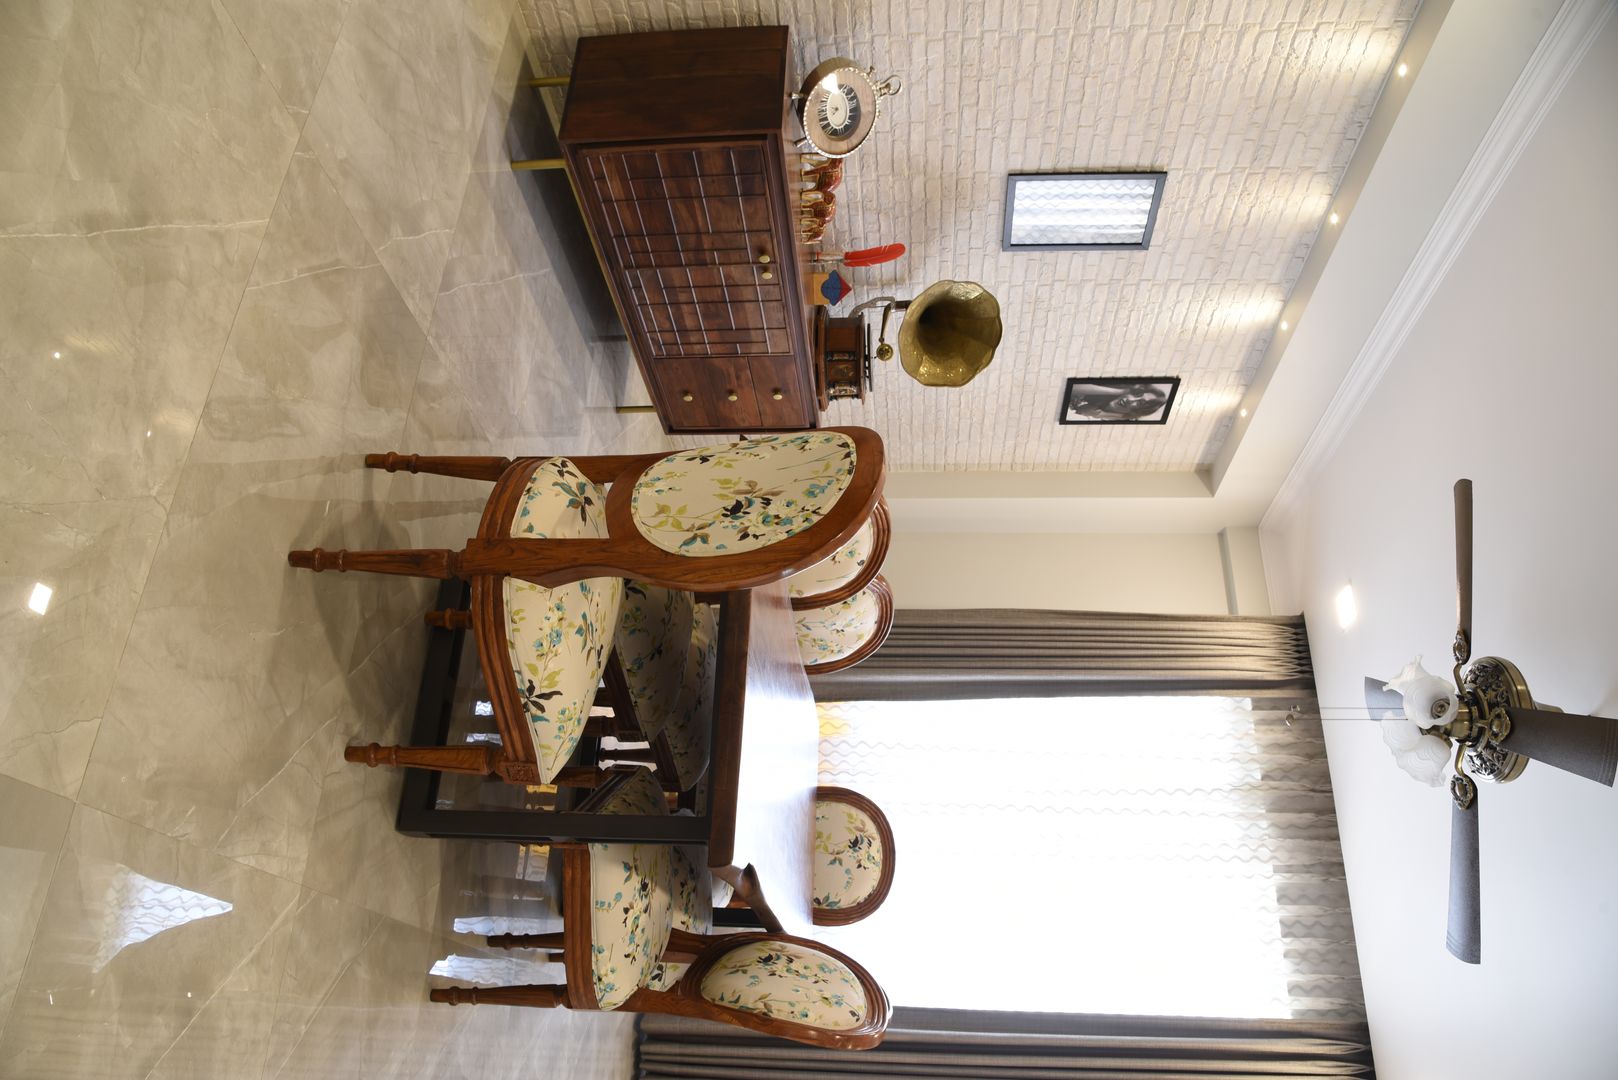 Dining room- Apartment on Golf course extension road, Gurugram The Workroom Dining room